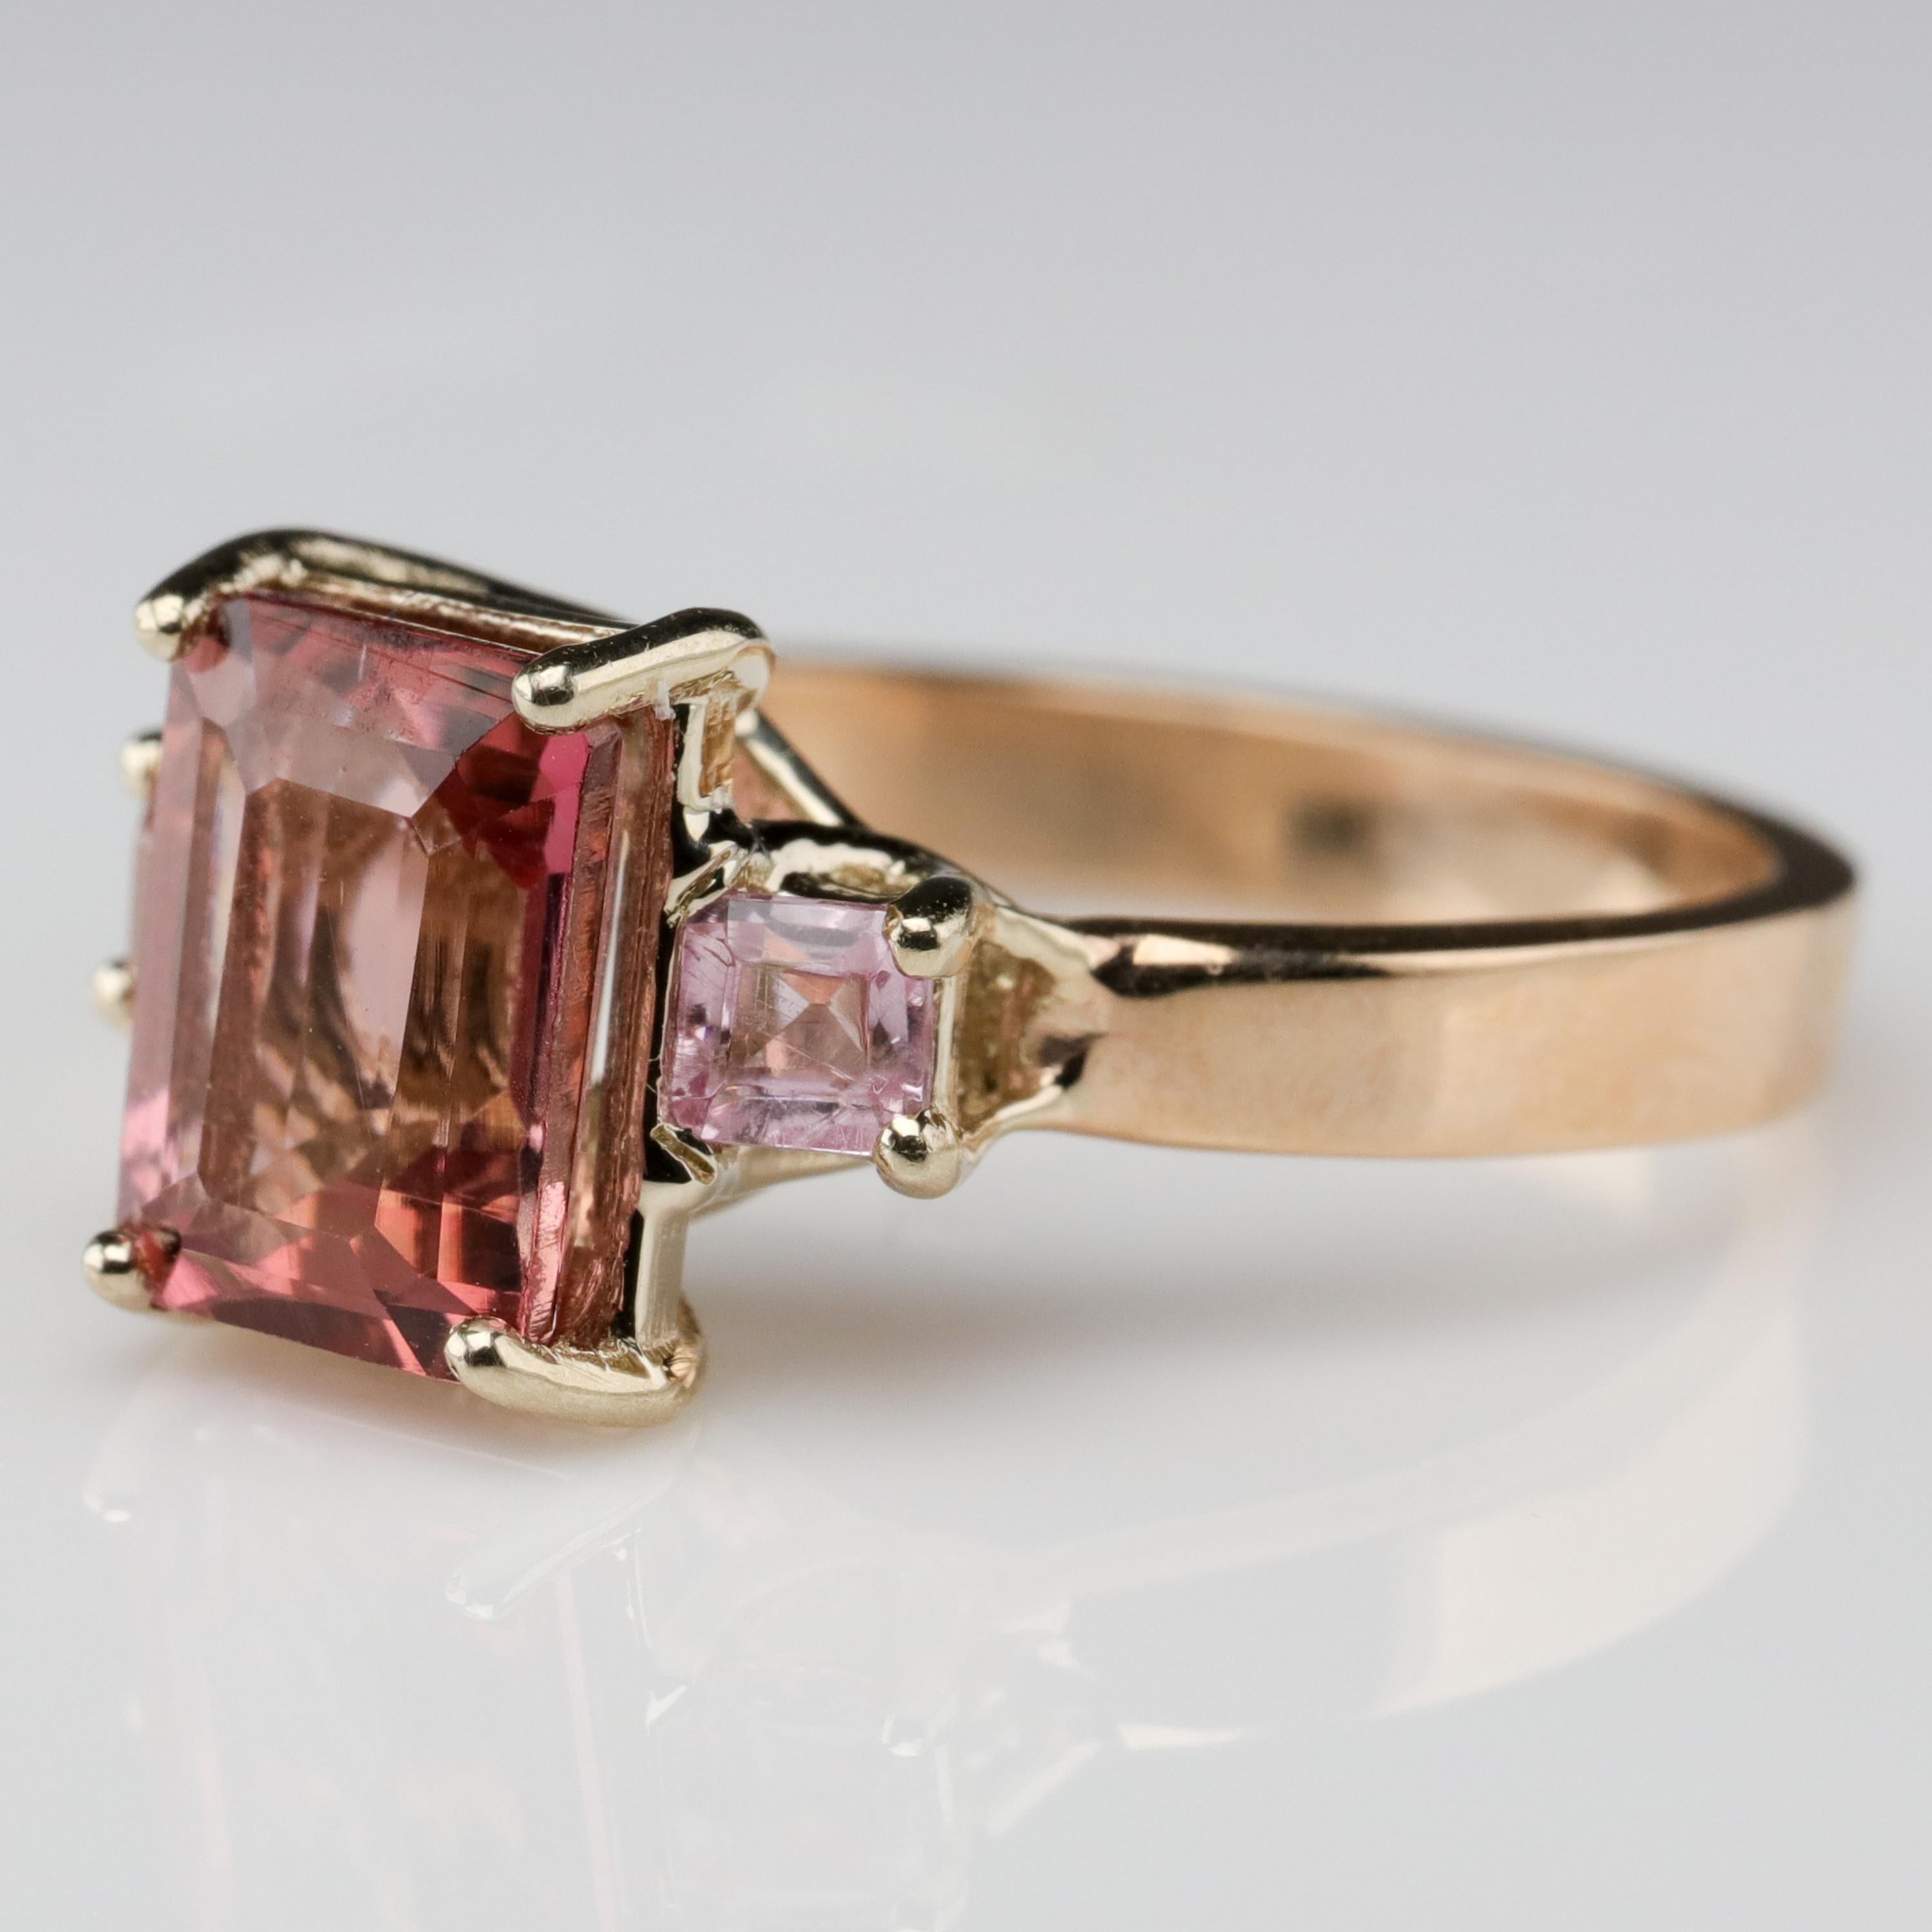 This ring was hand-made by an old-school jeweler in Pennsylvania and features a peachy-purplish-pink emerald-cut precious topaz stone from Brazil that measures approximately 8.14 mm x 6.06 and weighs approximately 1.85 carats. On either side are two